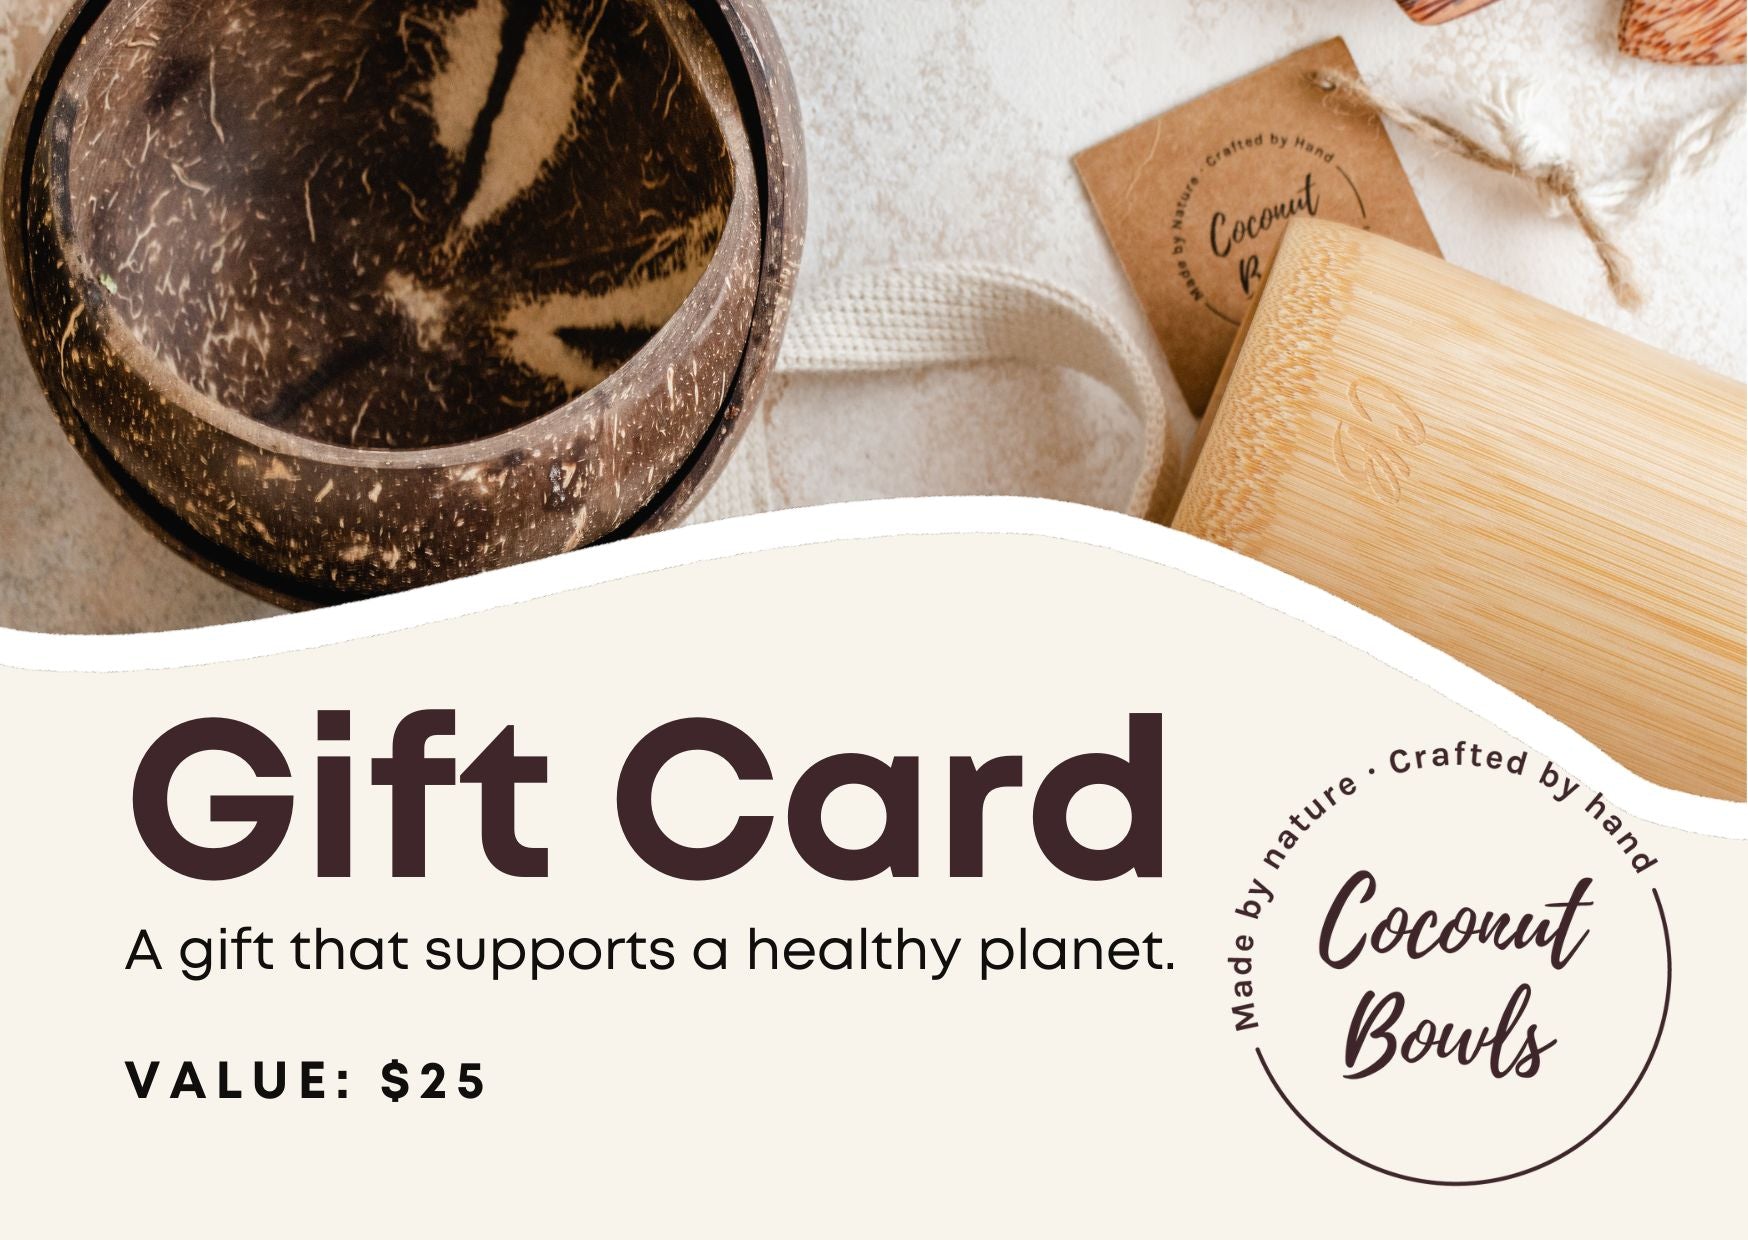 Coconut Bowls E-Gift Cards